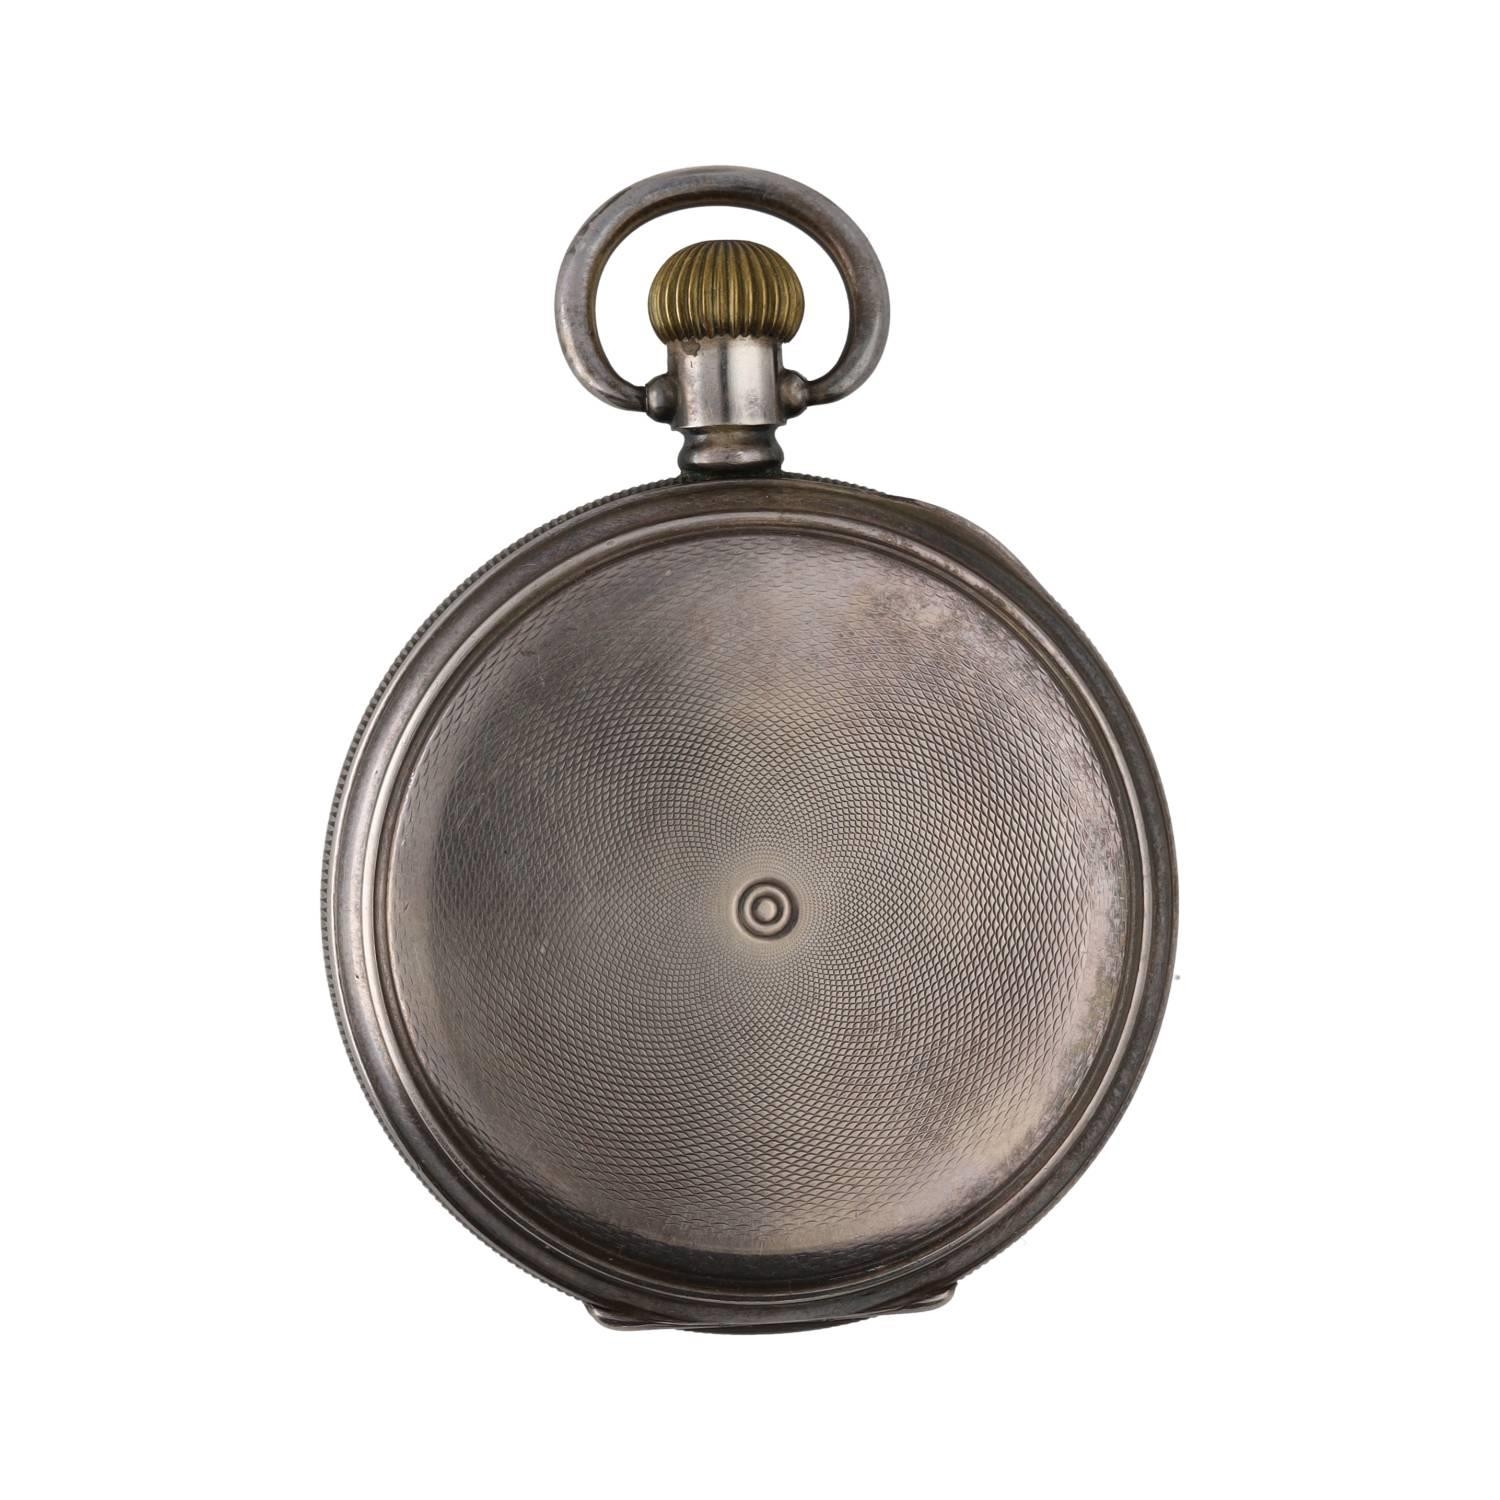 American Waltham 'Braille' silver lever hunter pocket watch, circa 1917, serial no. 21608887, signed - Image 5 of 5